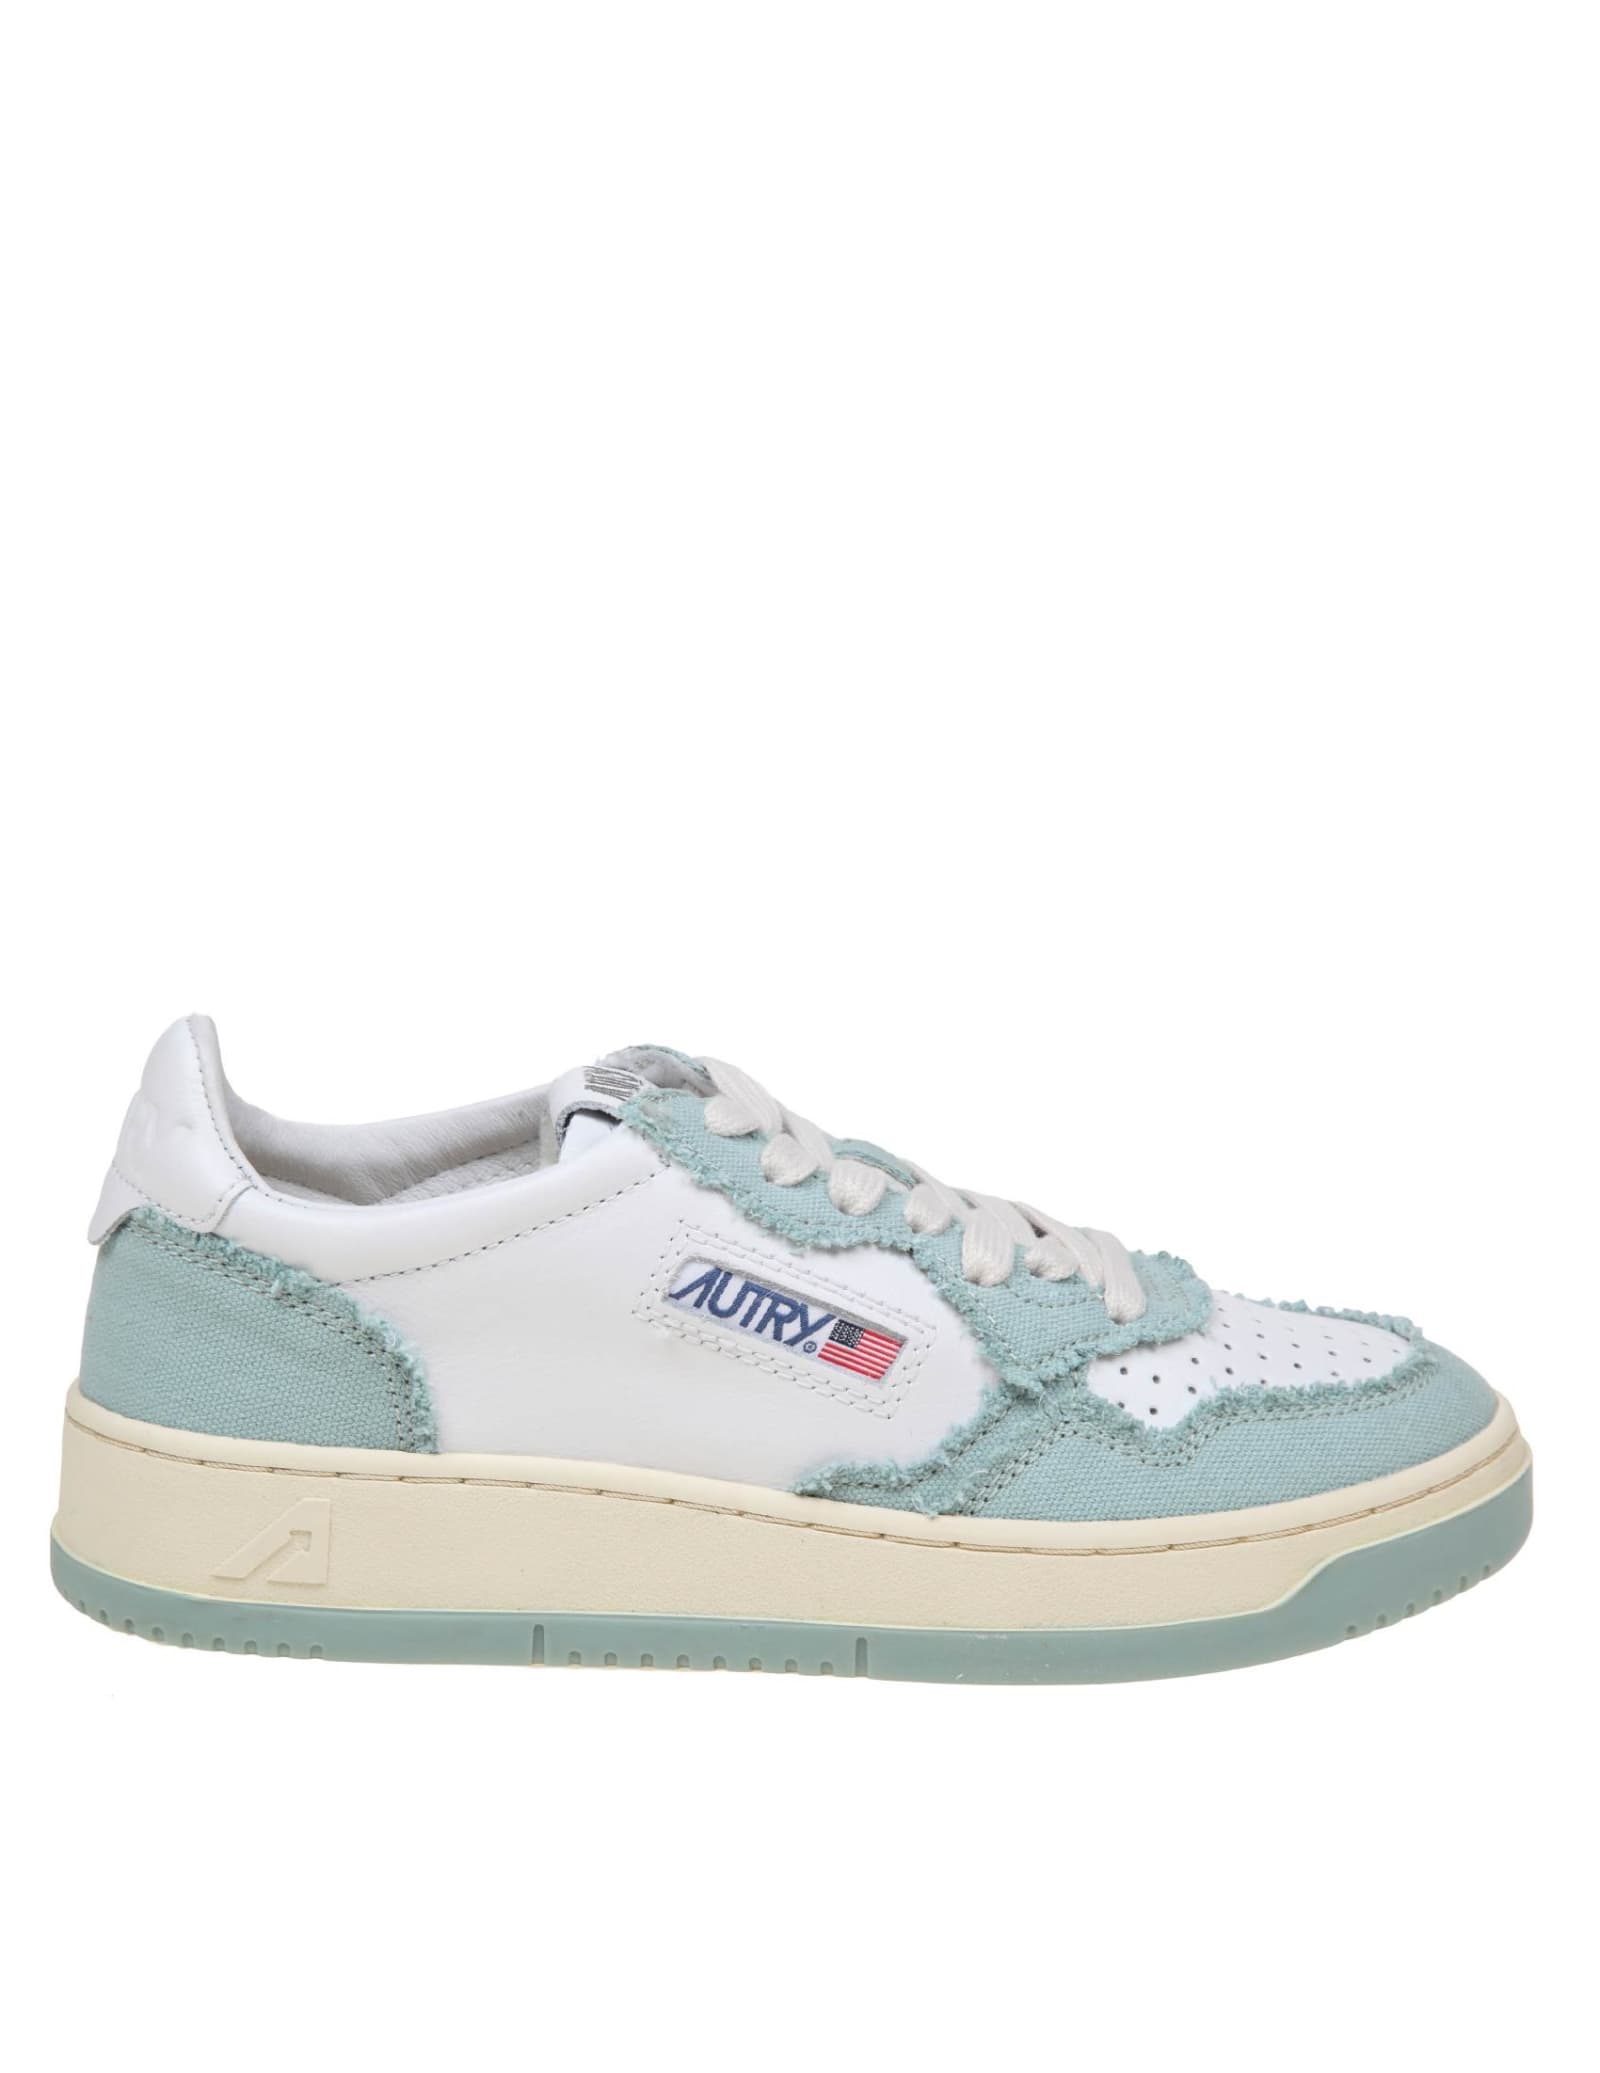 AUTRY SNEAKERS IN WHITE AND LIGHT BLUE LEATHER AND CANVAS